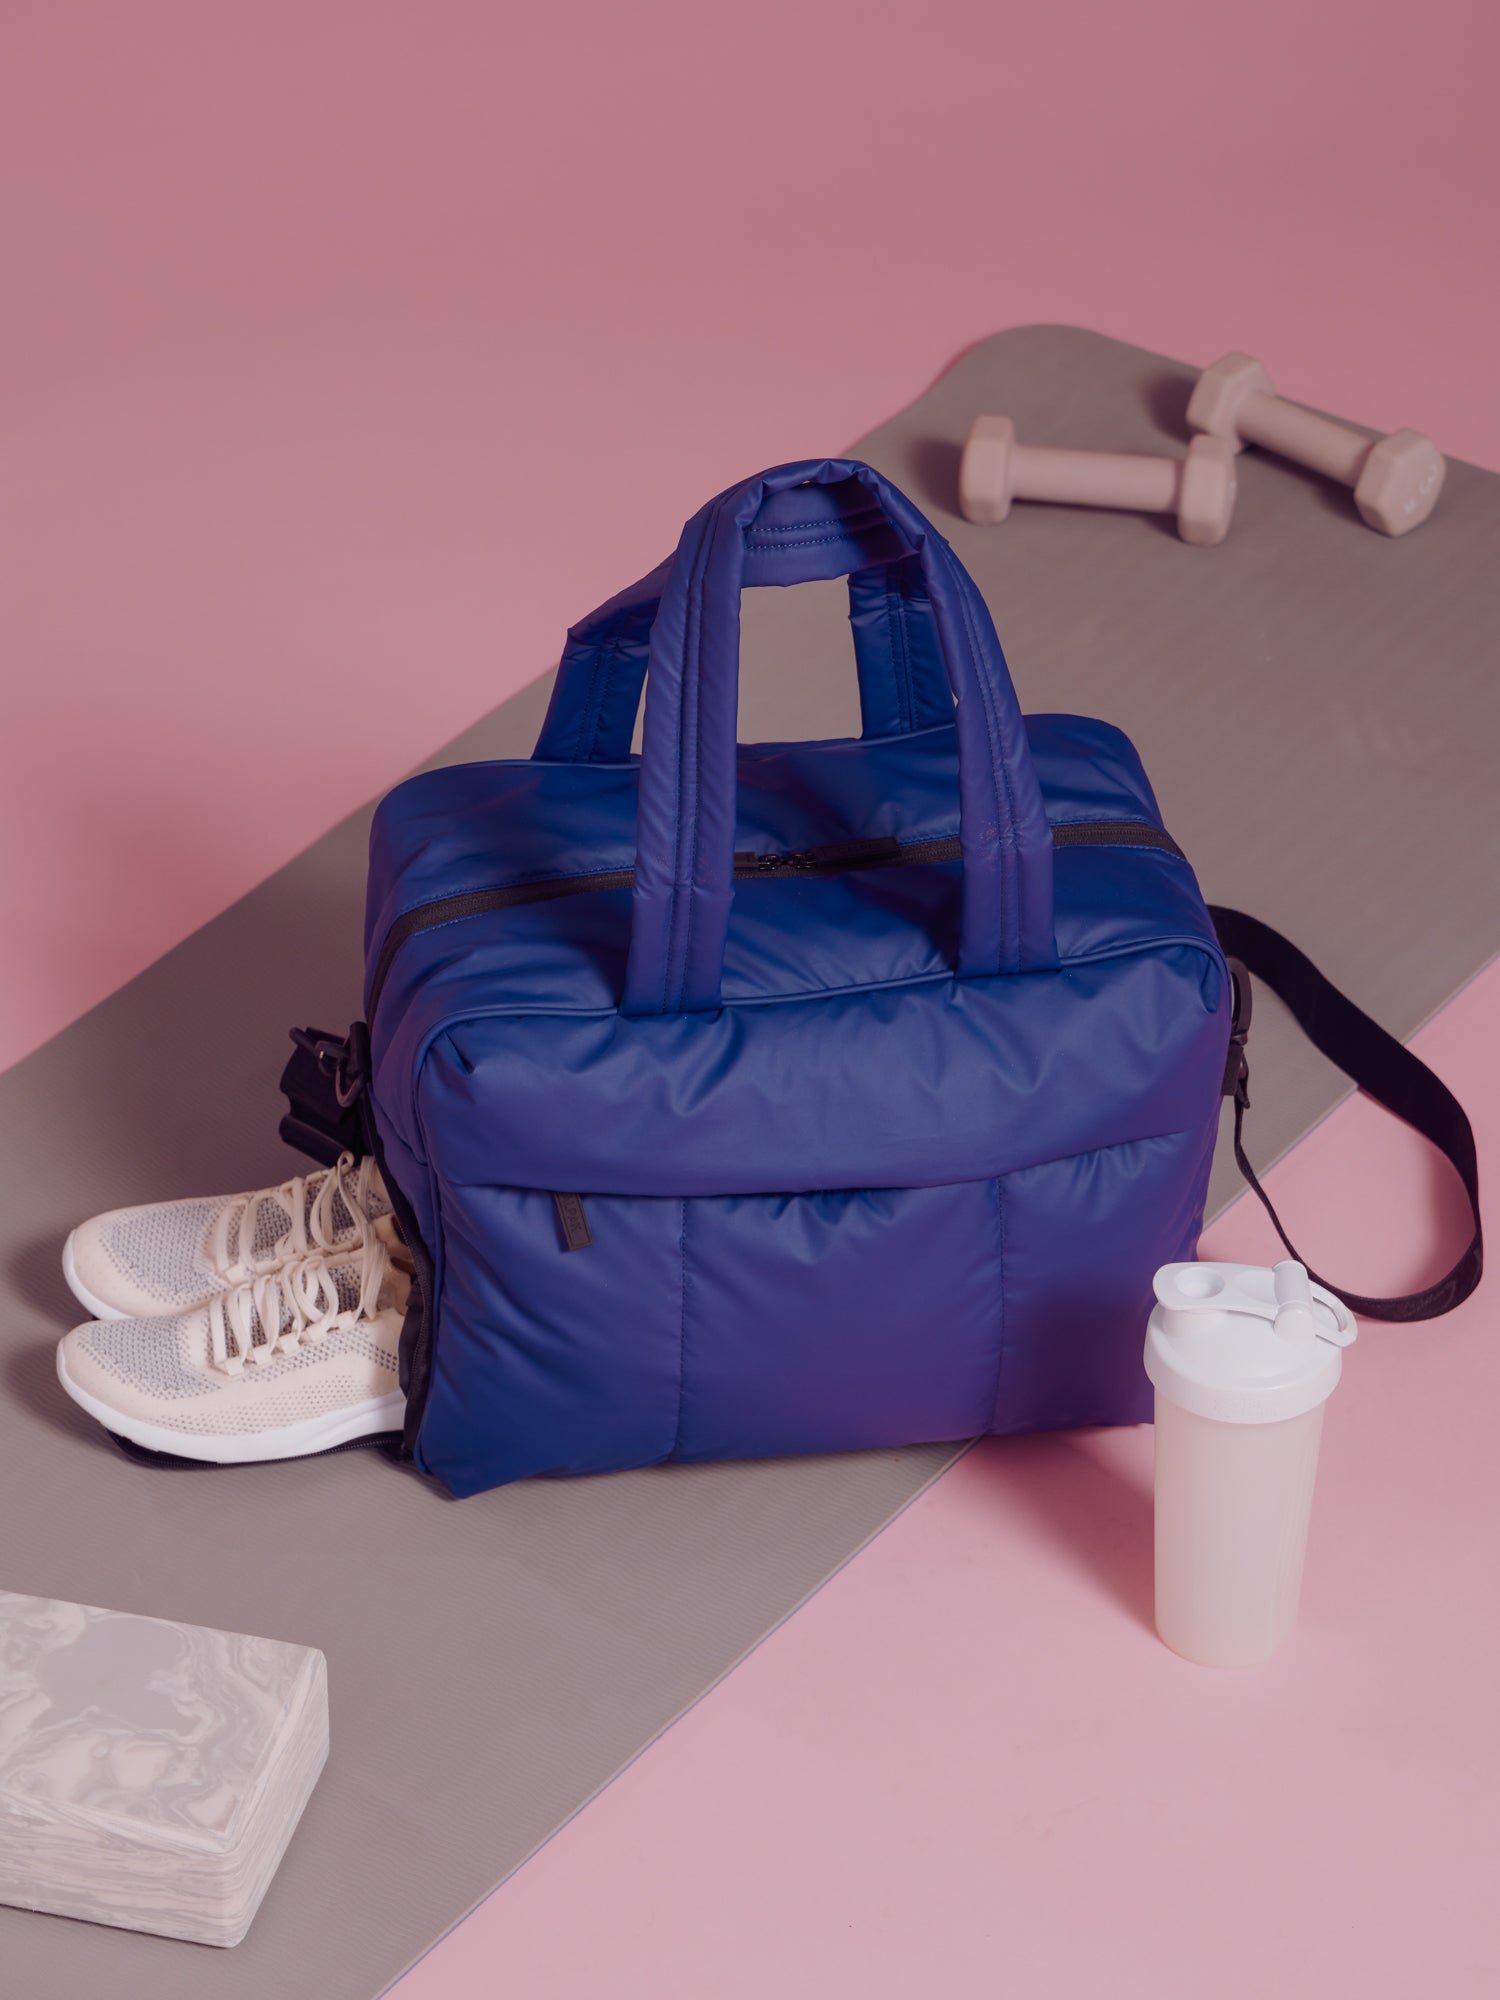 Navy blue CALPAK Luka Duffel featuring side shoe compartment for gym